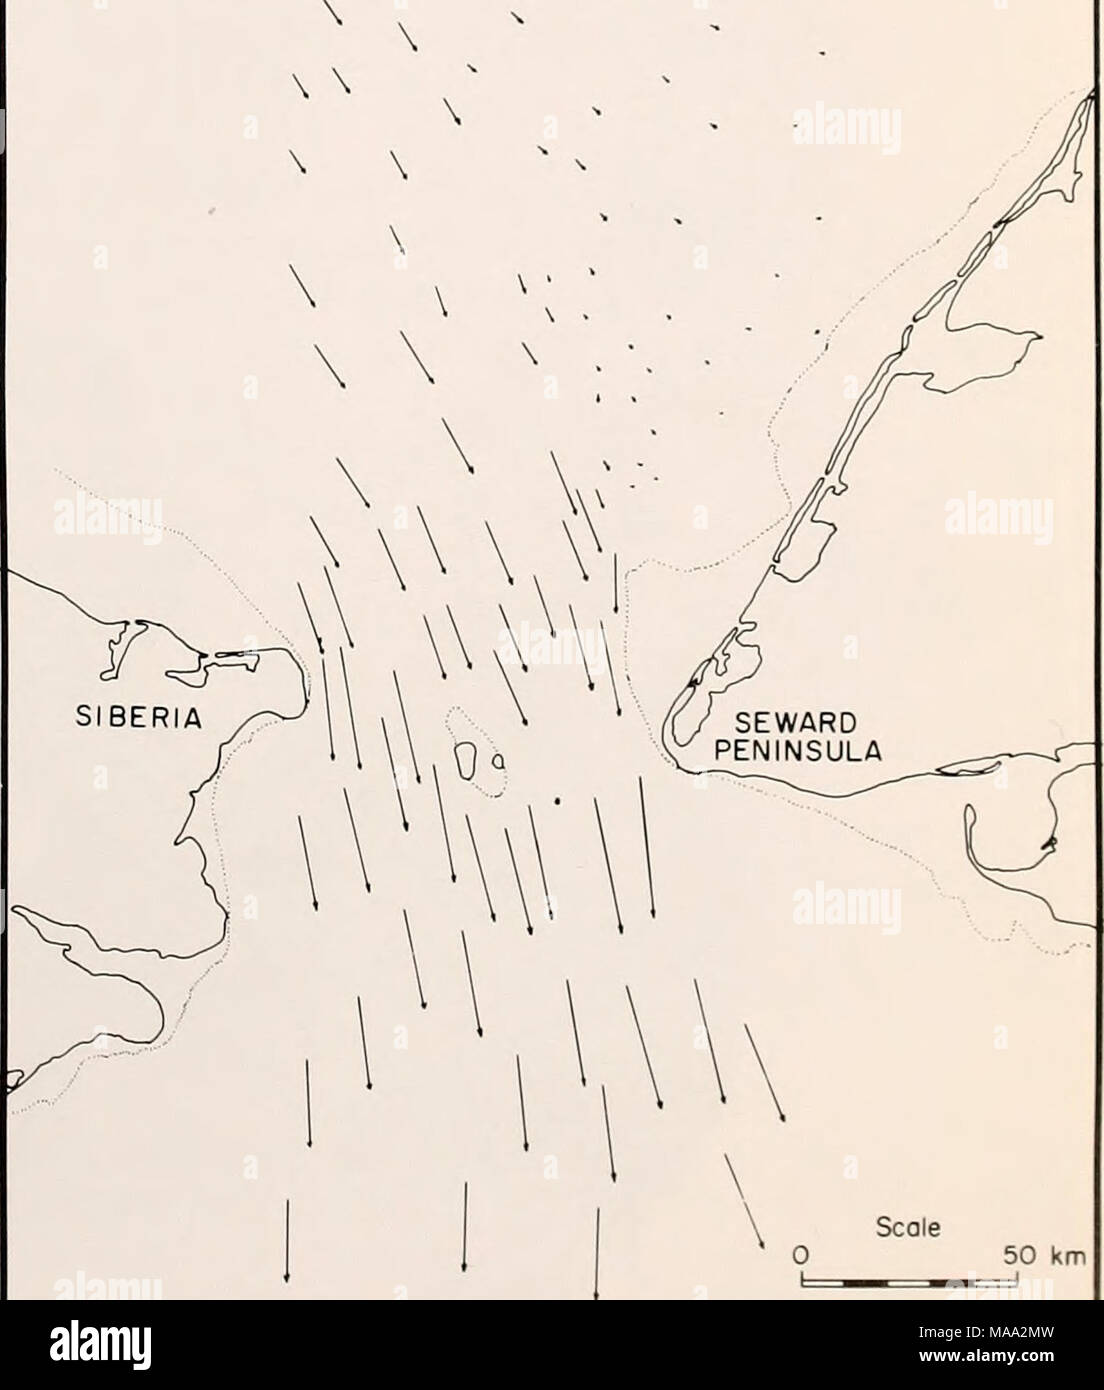 . The Eastern Bering Sea Shelf : oceanography and resources / edited by Donald W. Hood and John A. Calder . 50 km Figure 46-2. Displacement vectors of individual ice floes in the Bering Strait region for the interval March 6-7, 1973. Scale of vectors is indicated on map. Dotted lines indicate seaward margin of fast ice (from Shapiro and Burns 1975b, Fig. 3, p. 382). Stock Photo